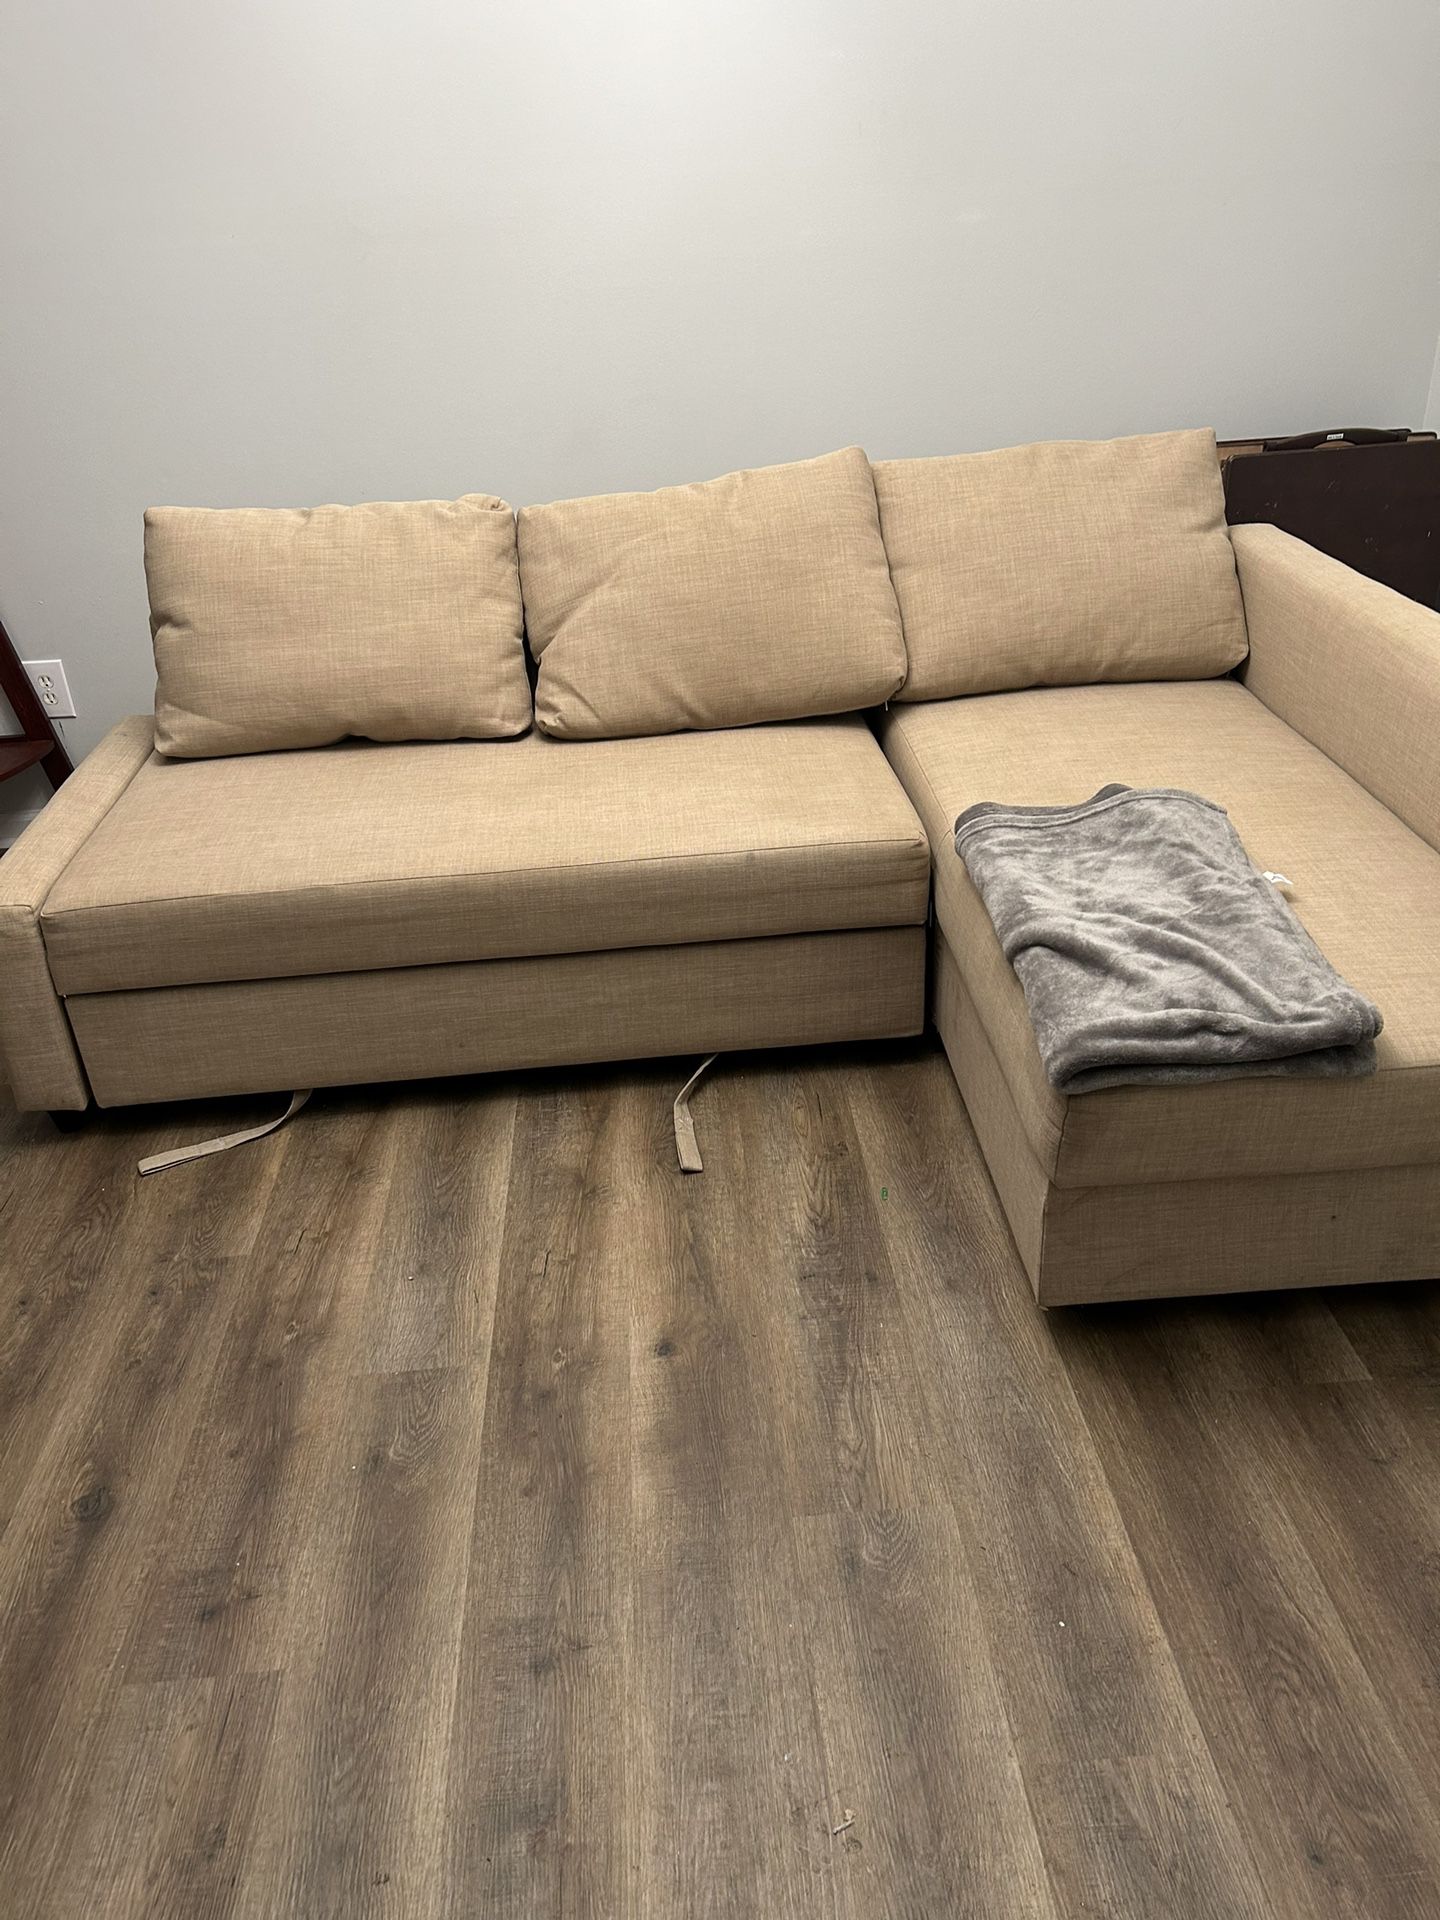 Sleeper Sectional Couch/Sofa with Storage 